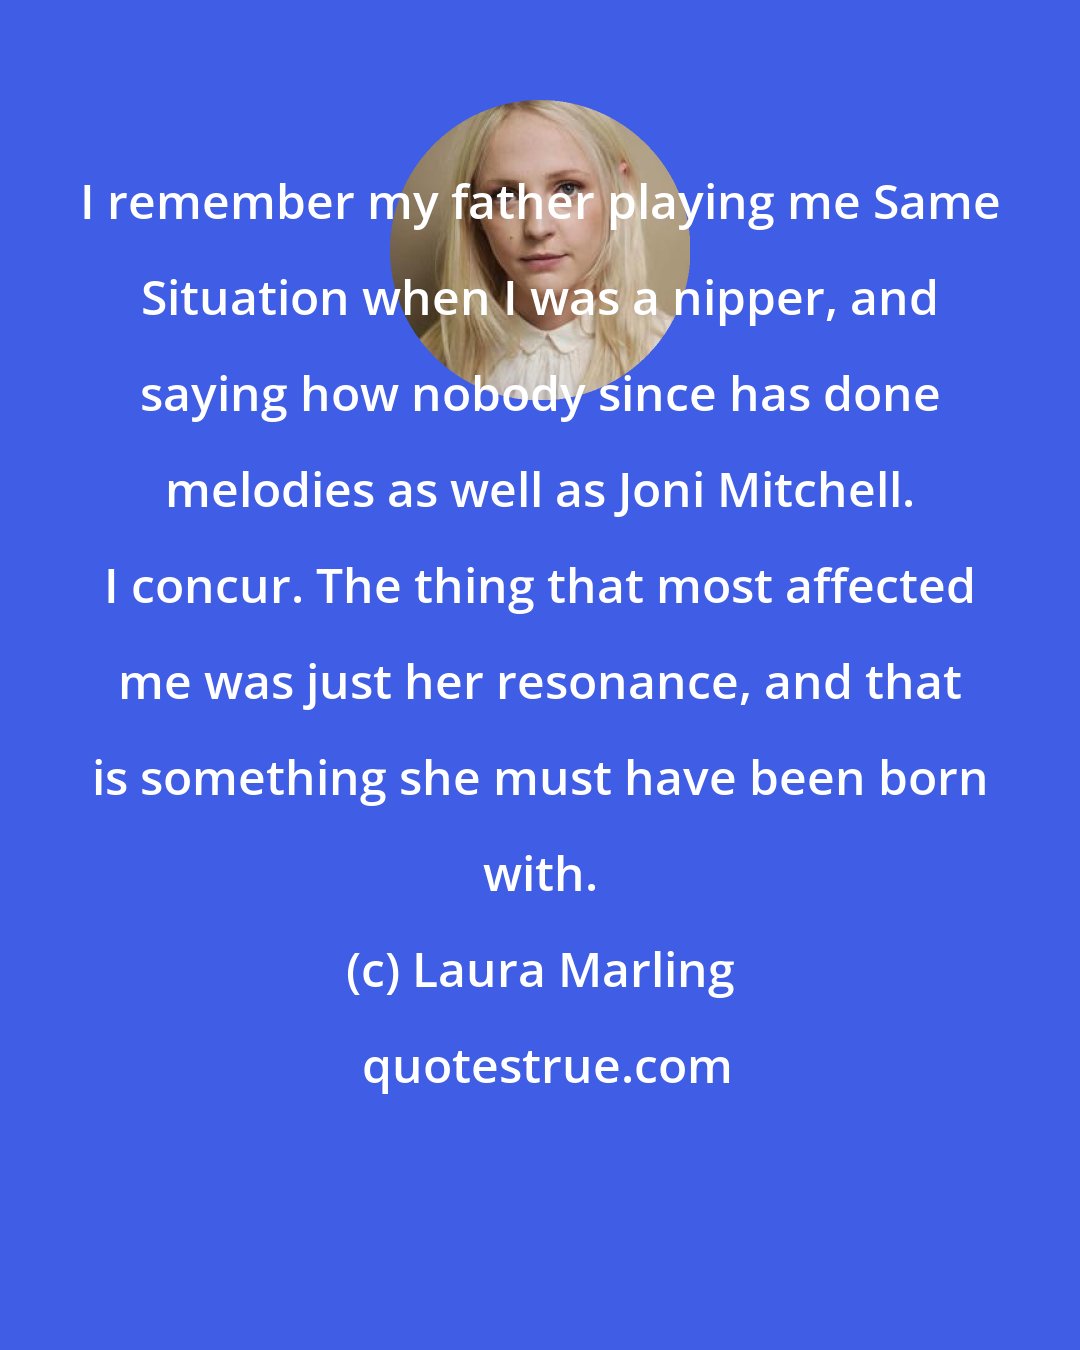 Laura Marling: I remember my father playing me Same Situation when I was a nipper, and saying how nobody since has done melodies as well as Joni Mitchell. I concur. The thing that most affected me was just her resonance, and that is something she must have been born with.